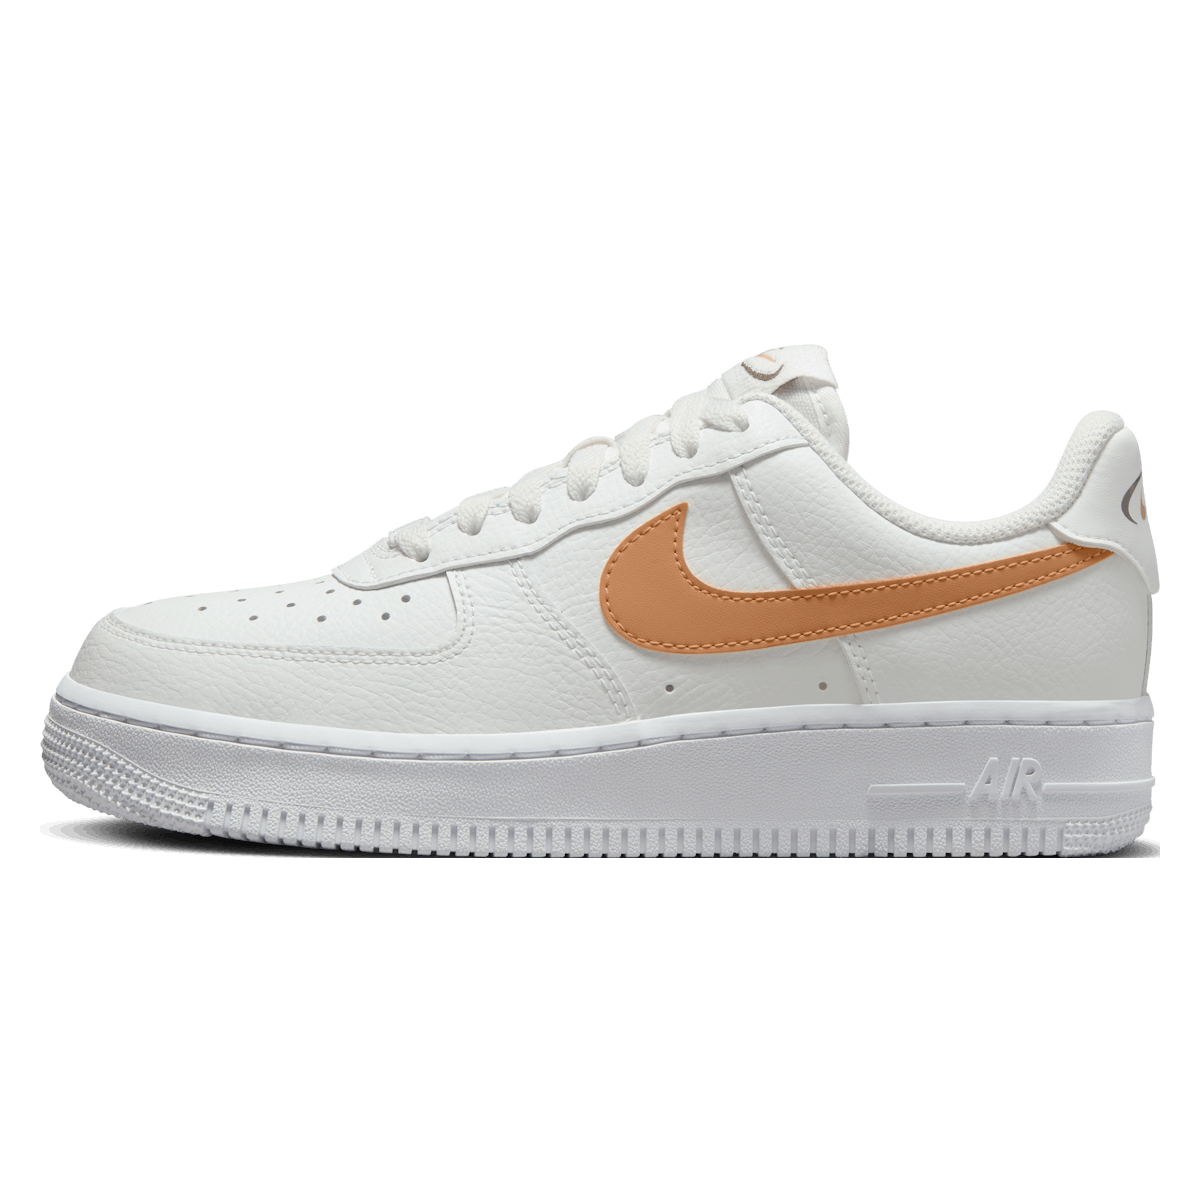 Nike Air Force 1 '07 Wmns "Amber Brown"